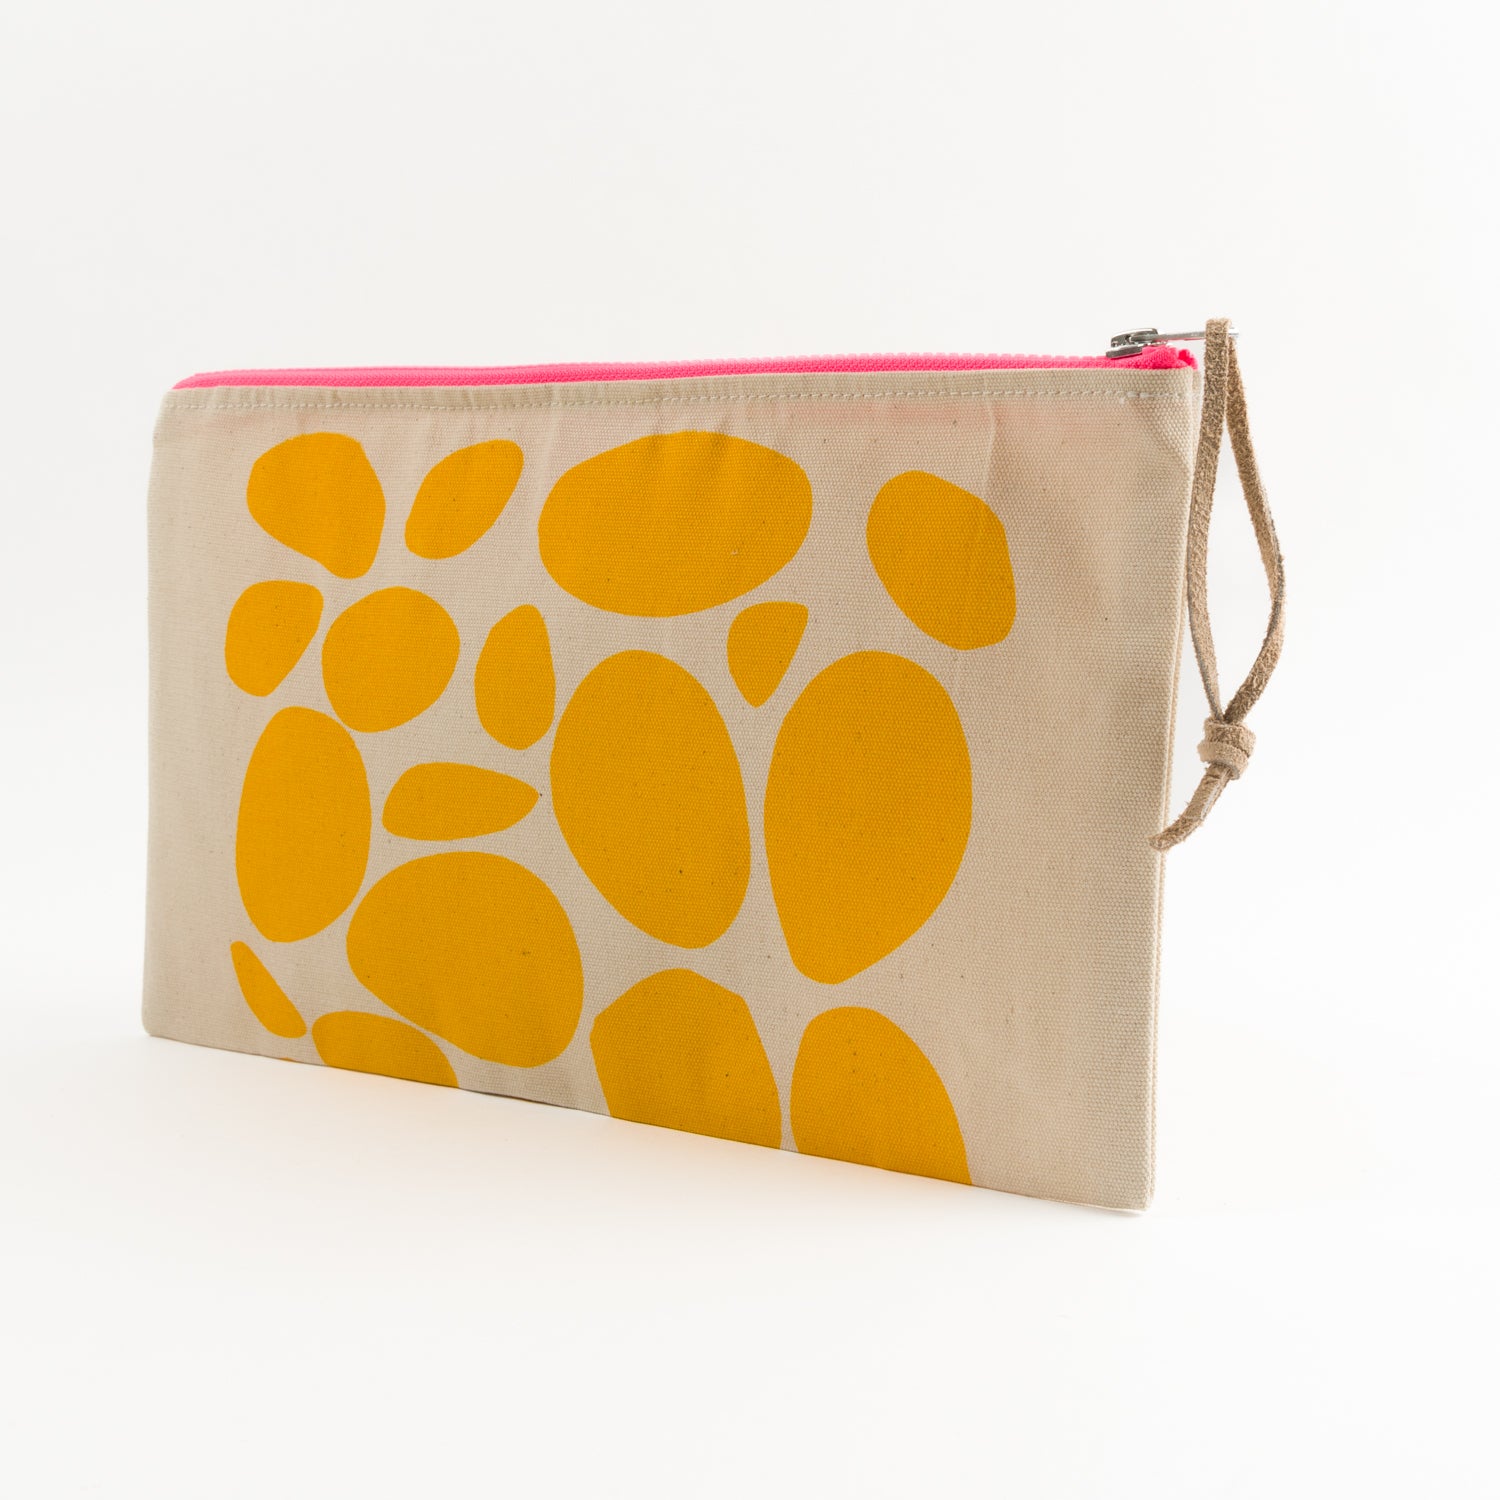 NOTIONS POUCH - PEBBLES YELLOW